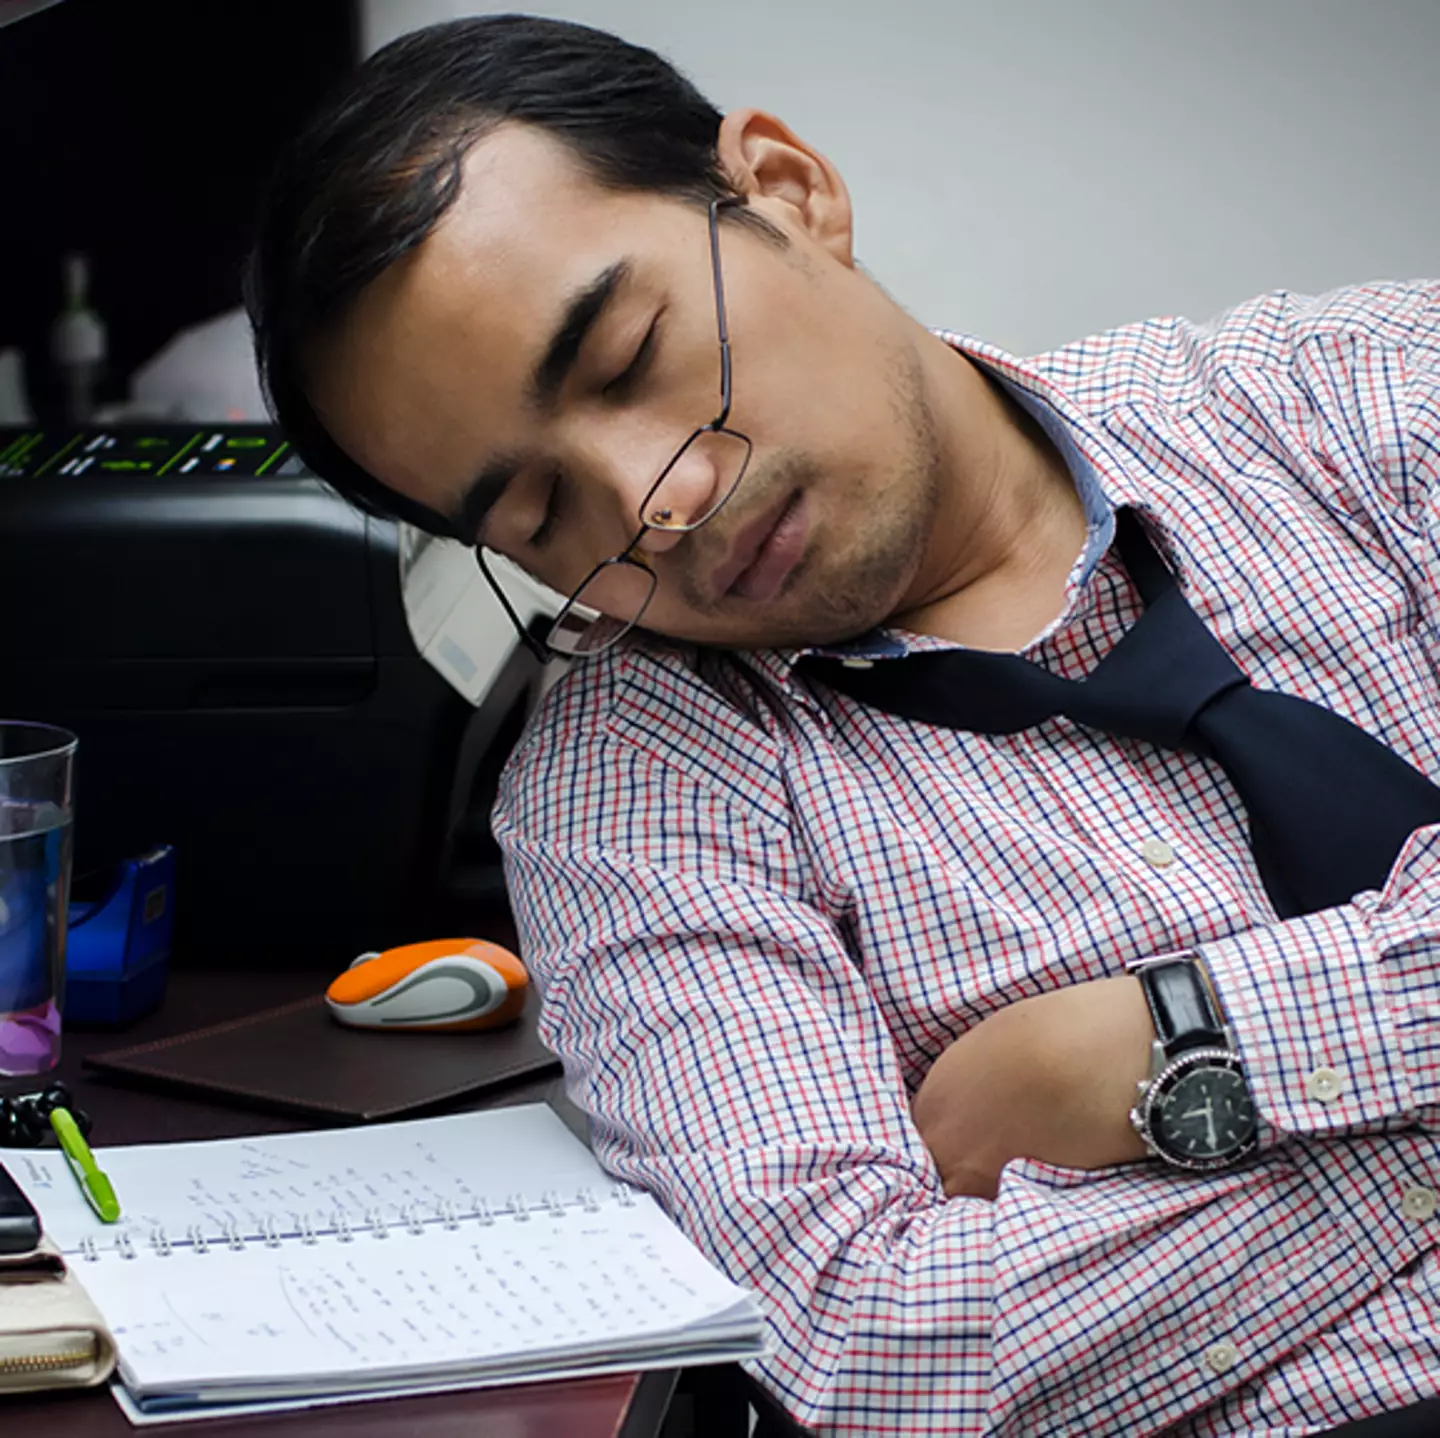 Startup working on tech that means you can keep working while you sleep